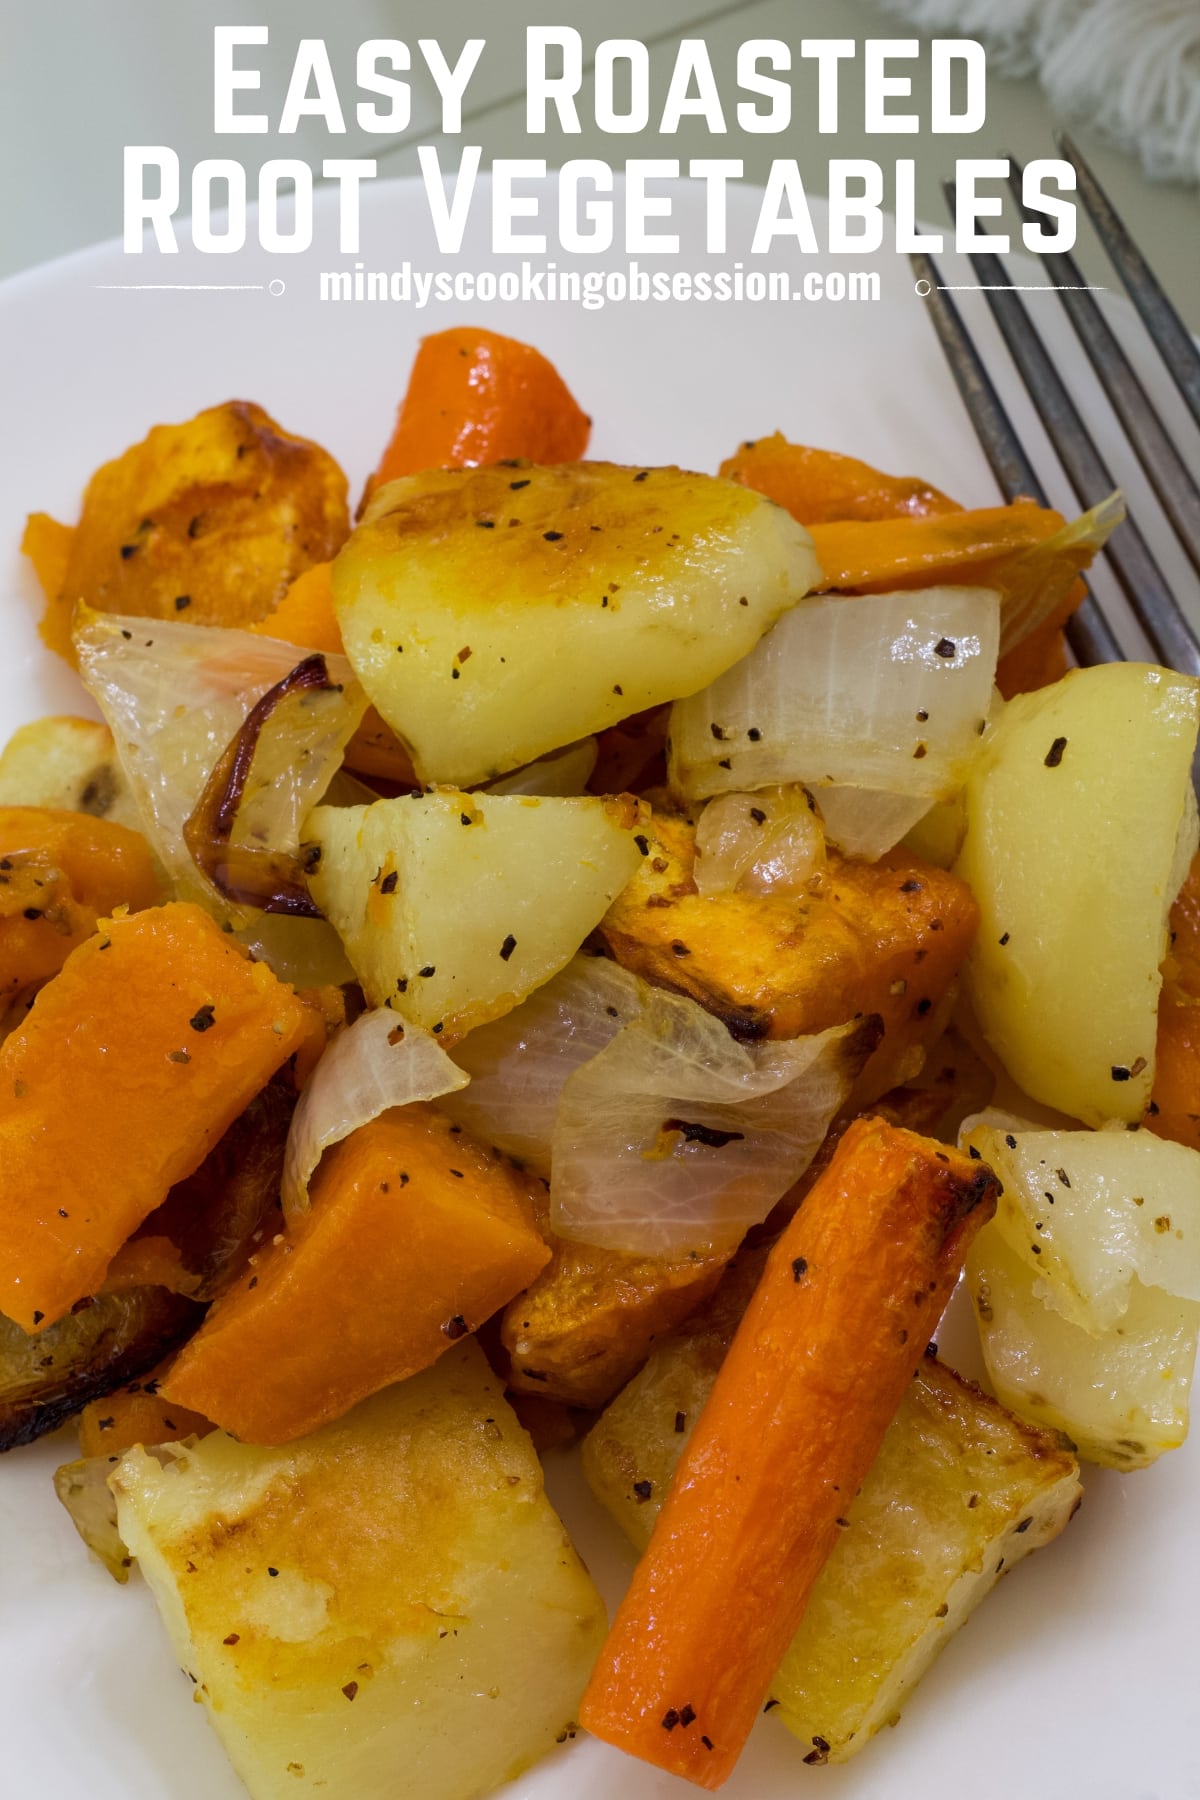 Easy Oven Roasted Root Vegetables Recipe features Russet potatoes, sweet potatoes, carrots and onion. It is an easy and healthy side dish.  via @mindyscookingobsession